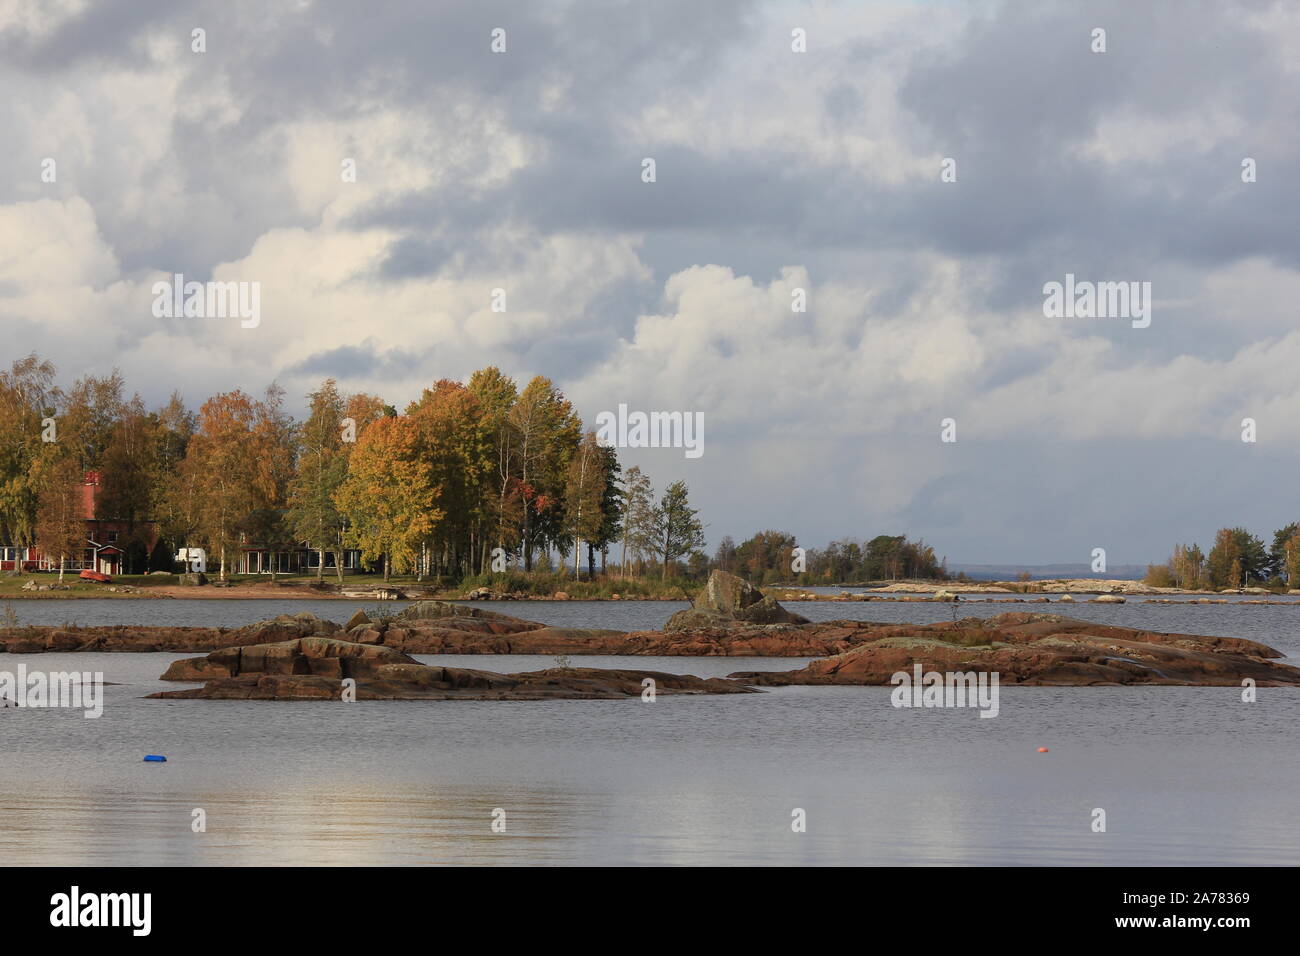 Rock formations and colorful trees at the shore of Lake Vanern, Sweden. Stock Photo